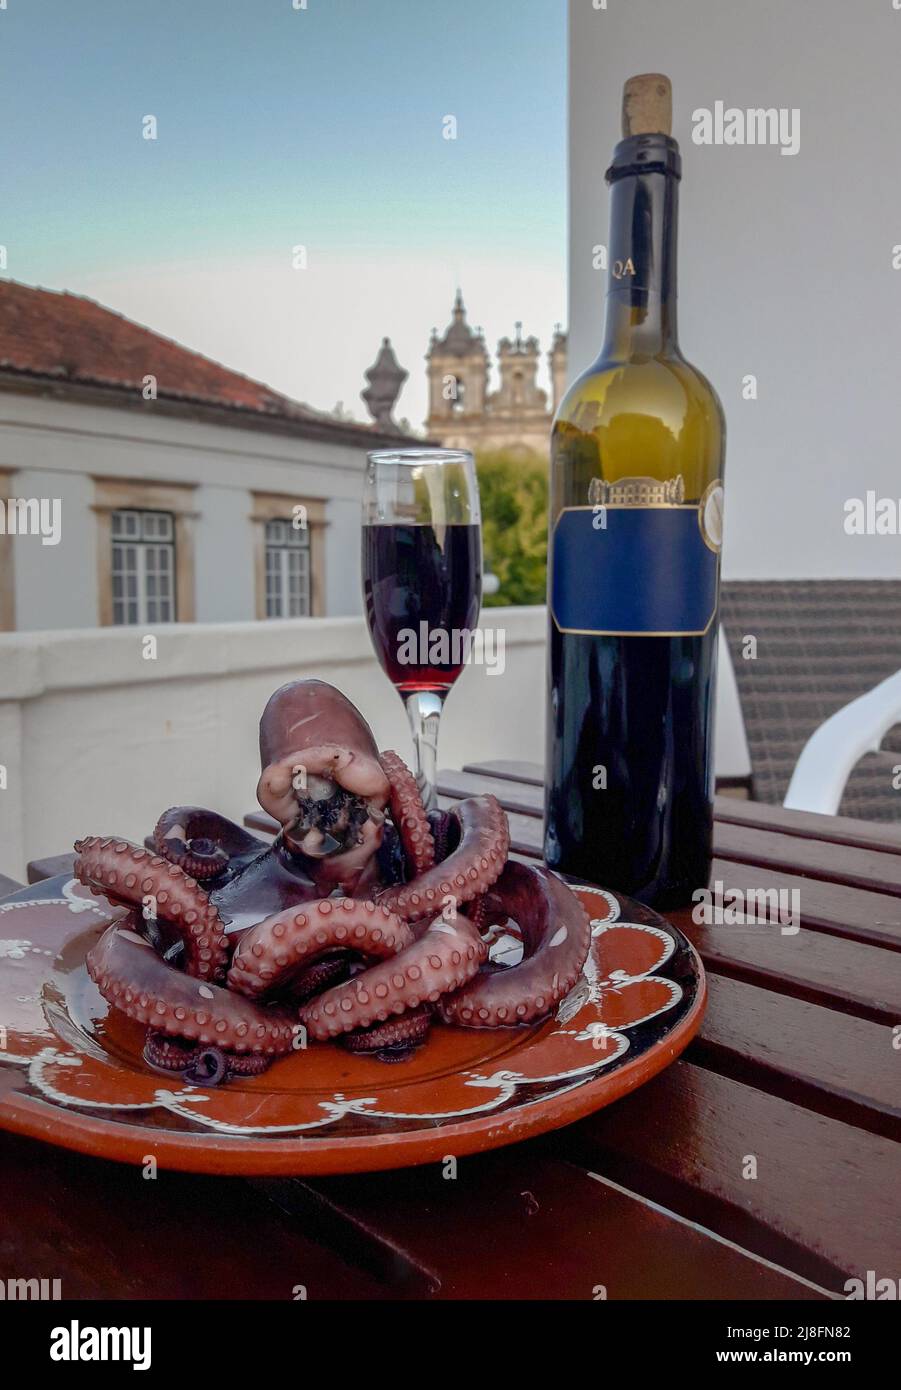 red wine bottle with glass and octopus from the hotel balcony Stock Photo